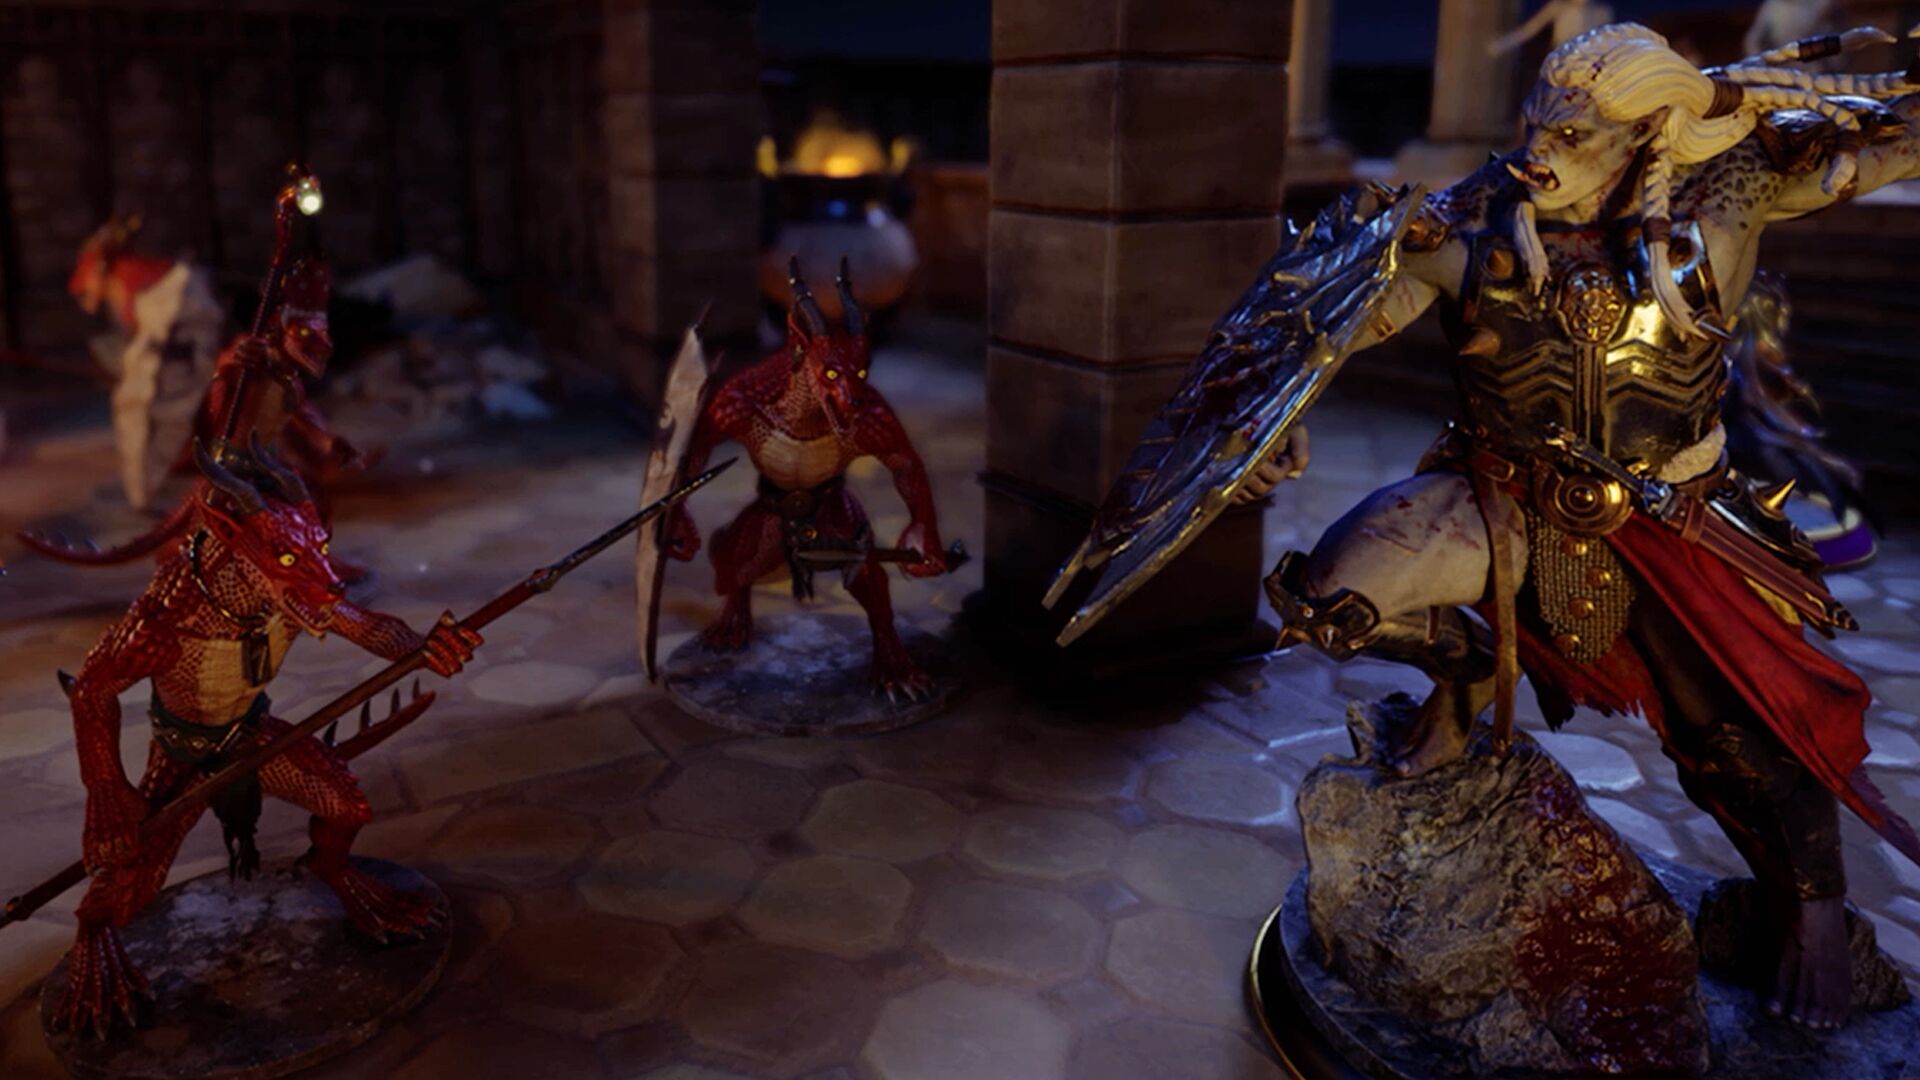 Fantasy figurines with visible bases prepare for battle in DnD's new virtual tabletop experience.